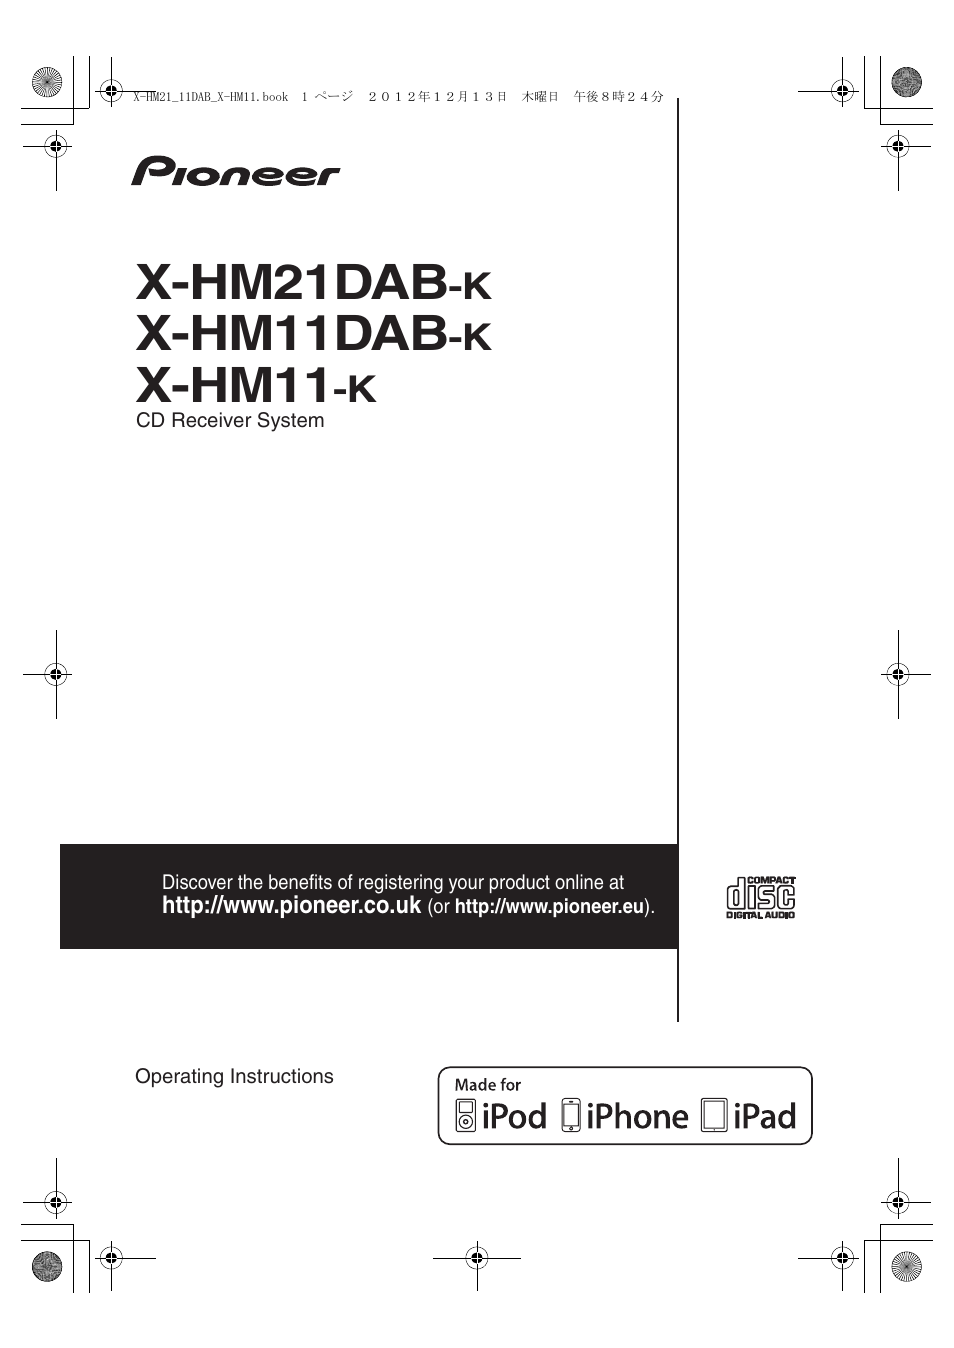 Pioneer X-HM11DAB-K User Manual | 36 pages | Also for: X-HM21DAB-K, X-HM11-K